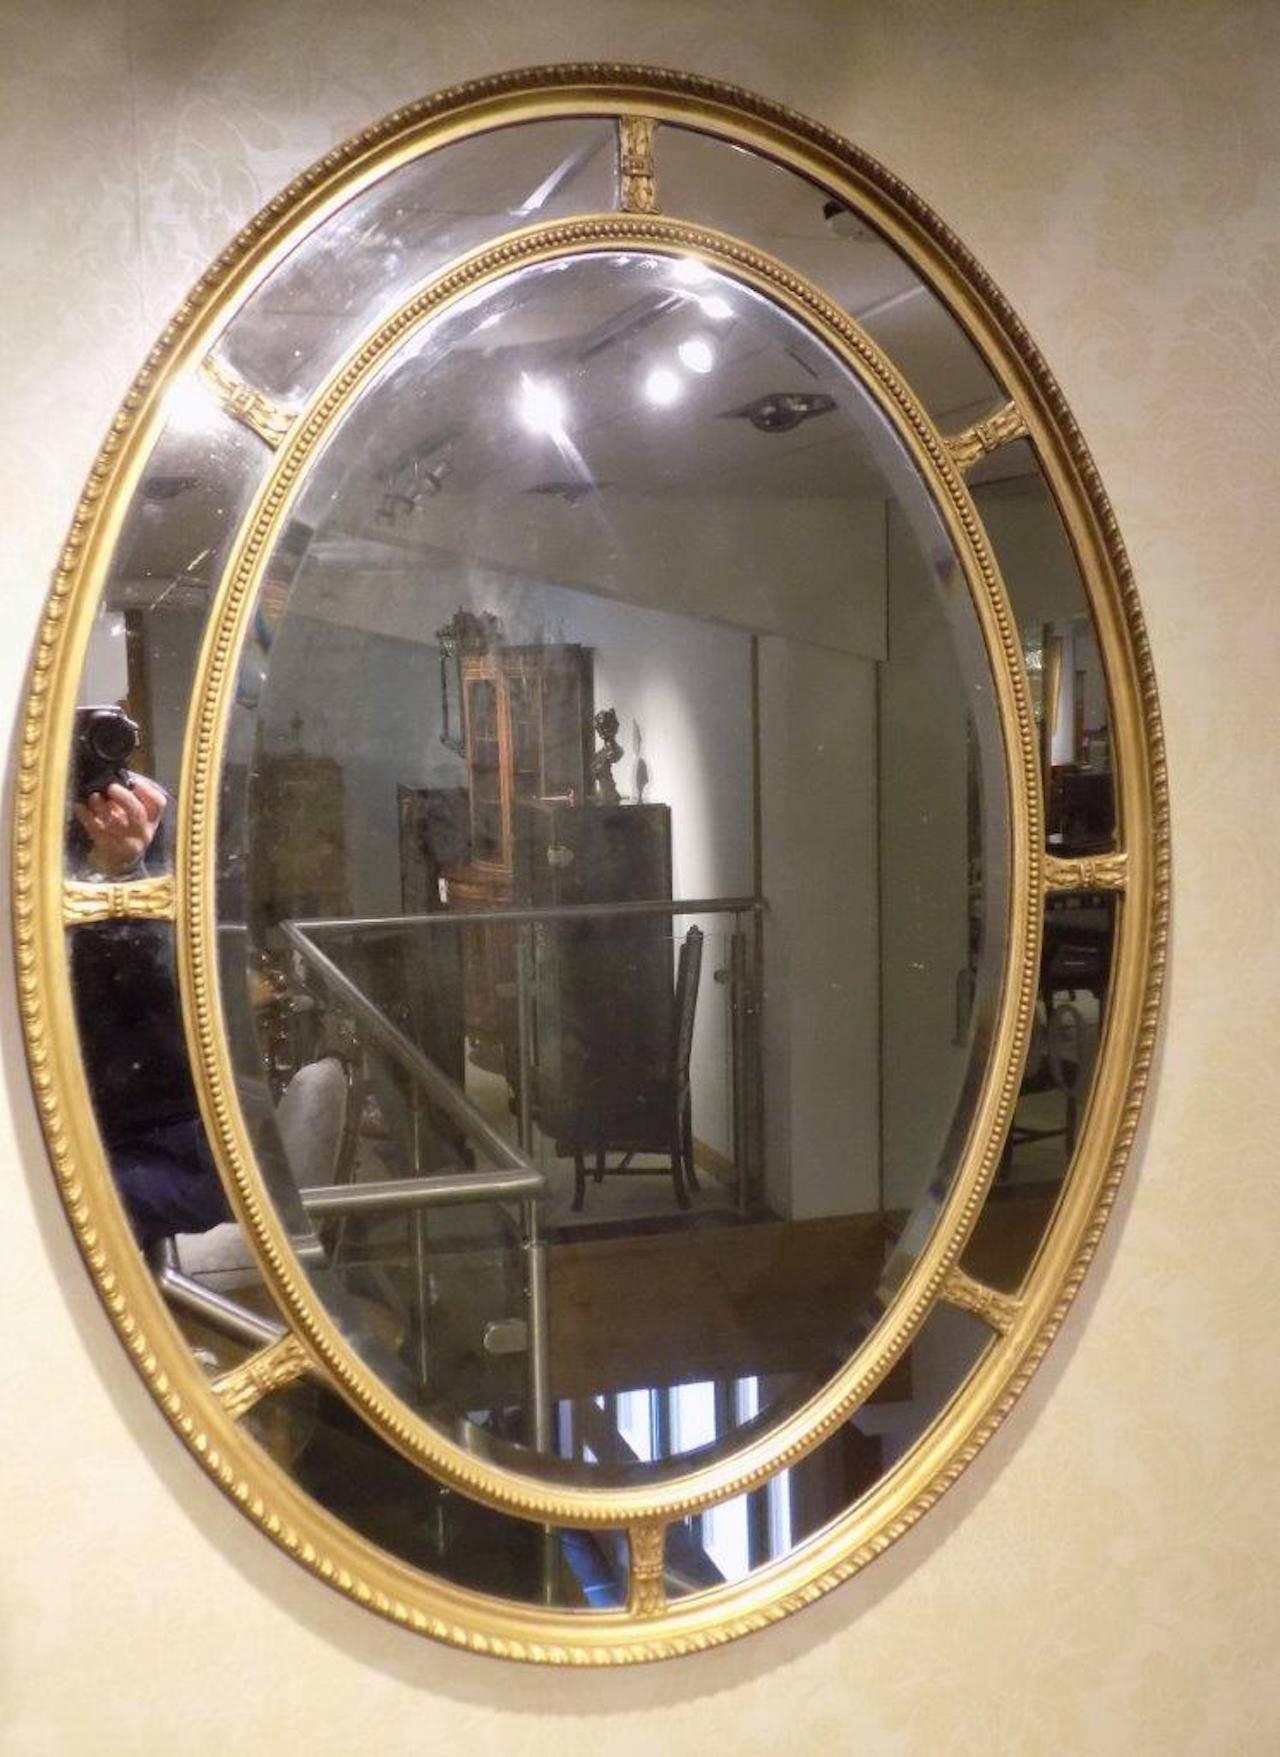 A gilt George III style oval margin mirror. Housed in a carved gilt-wood and gesso frame with a central bevelled mirror, flanked by smaller margin mirrors with a gadrooned carved border, English, circa 1900

Dimensions: 39